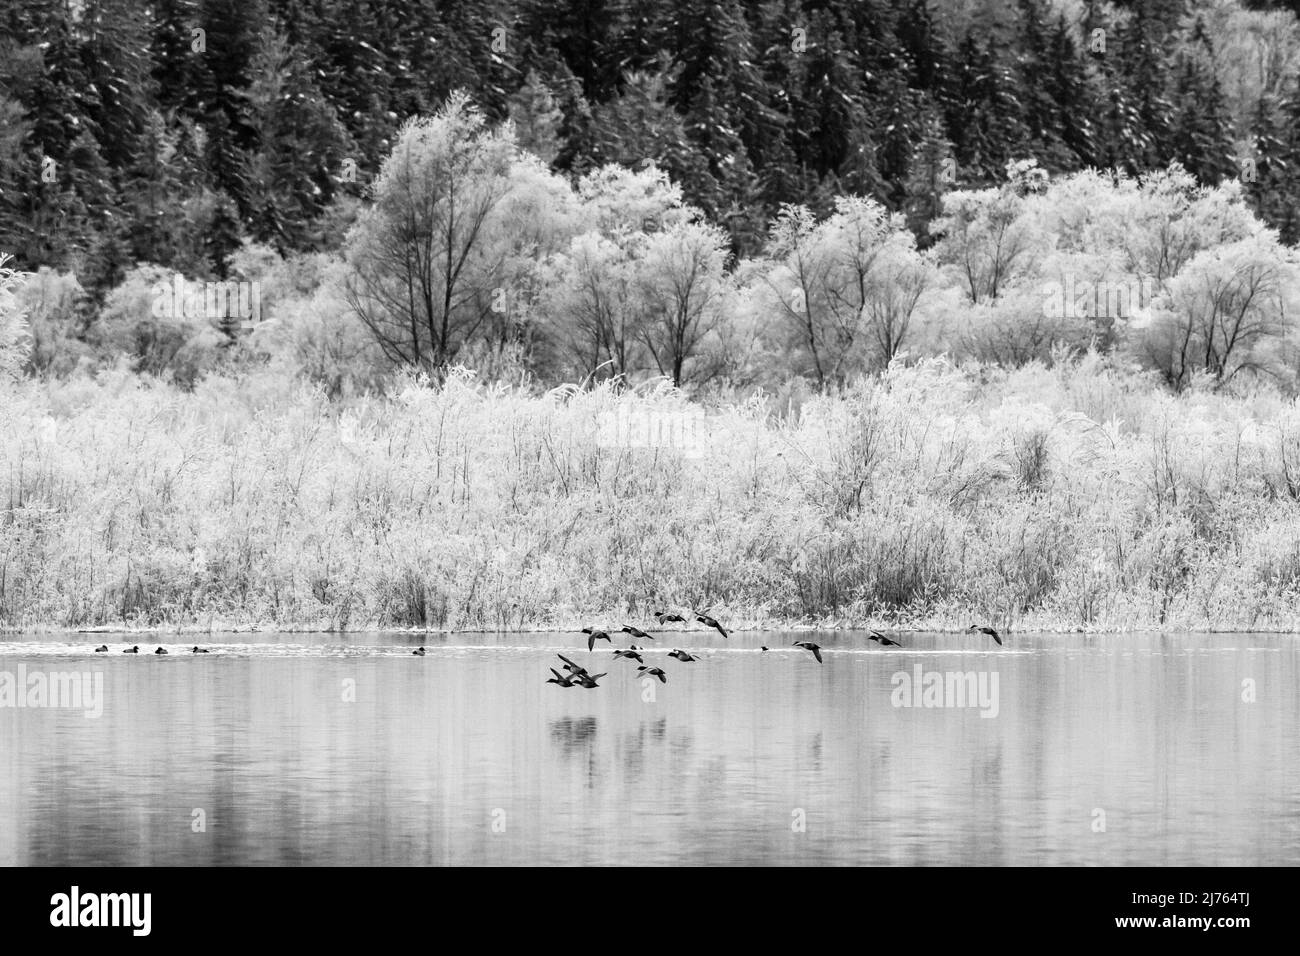 A group of pochard ducks flies low over the water of the Sylvenstein reservoir in Karwendel. The trees in the background are frozen with hoarfrost. Stock Photo